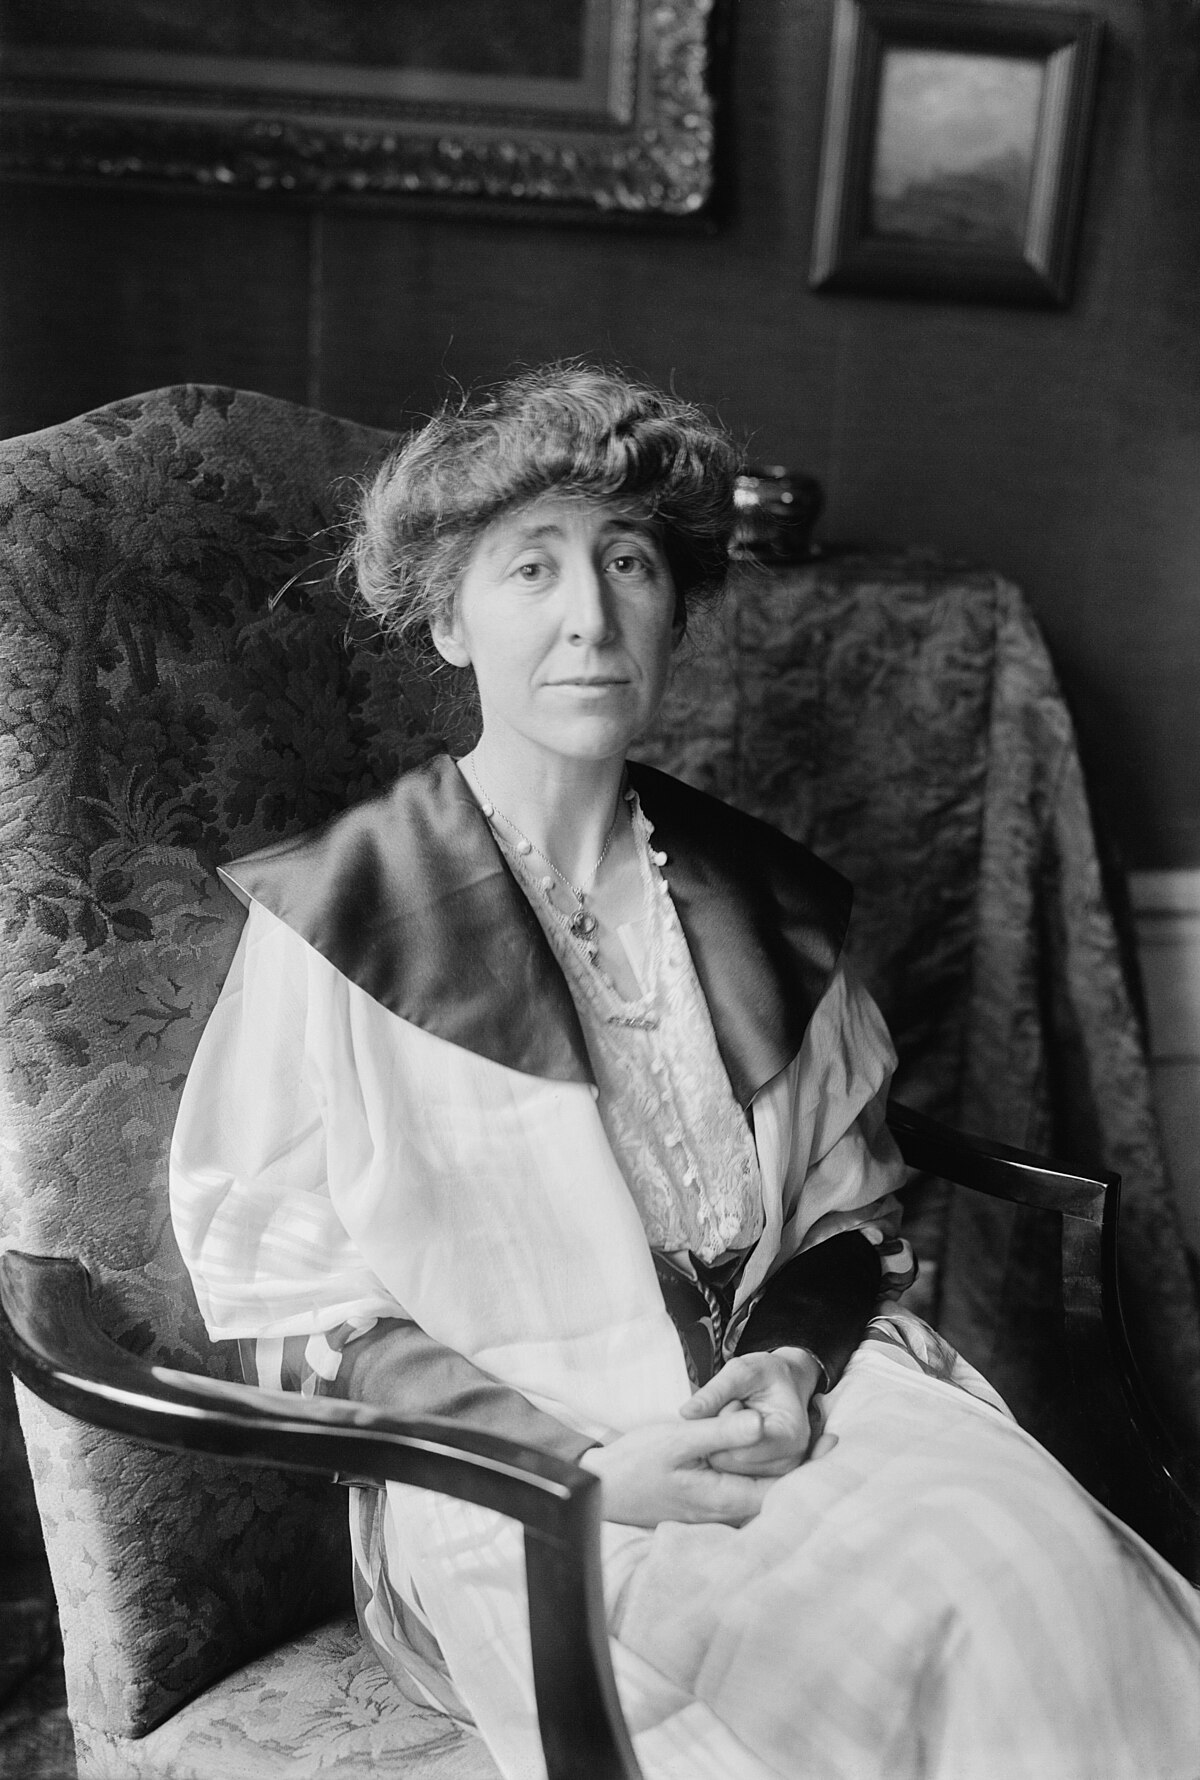 Jeannette Pickering Rankin (June 11, 1880 – May 18, 1973) was an American politician and women's rights advocate who became the first woman to hold 